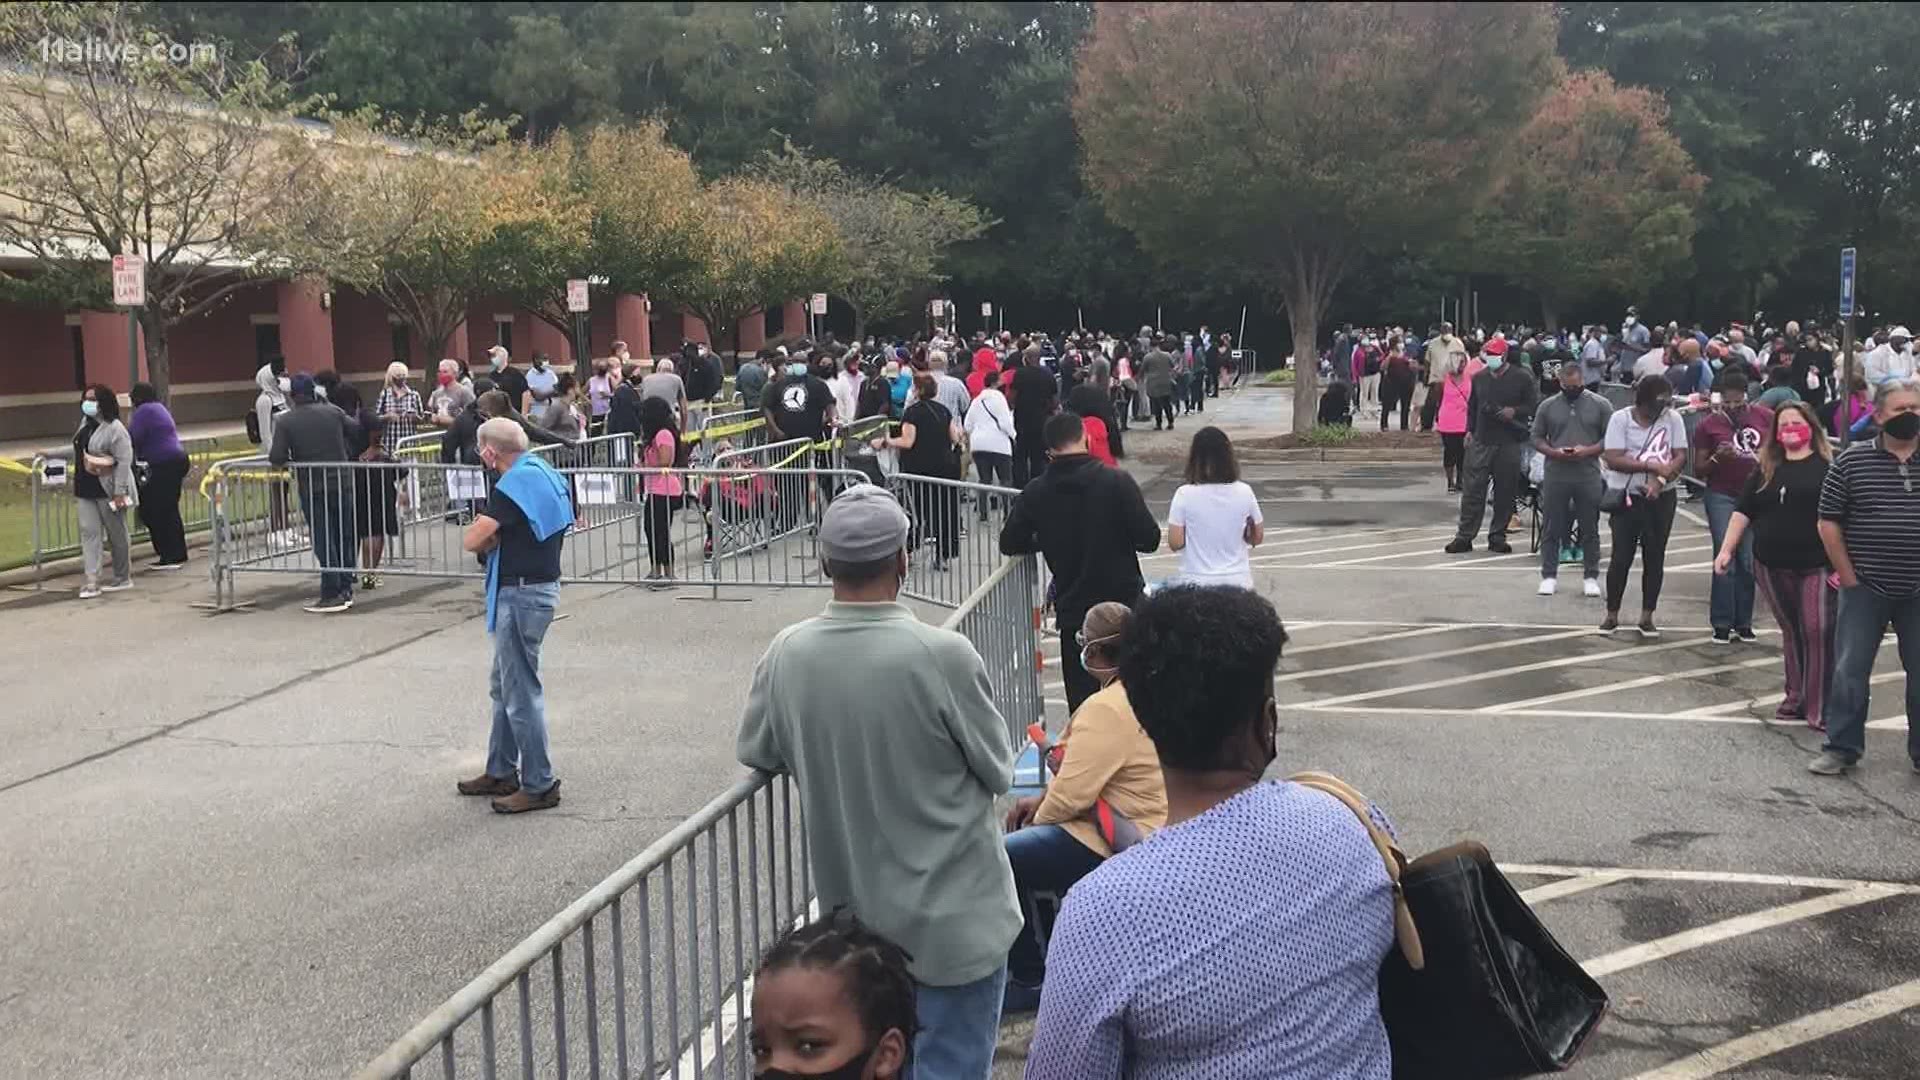 Thousands turned out to cast their ballot on the first day of early voting in Georgia. In many places, that meant long lines.